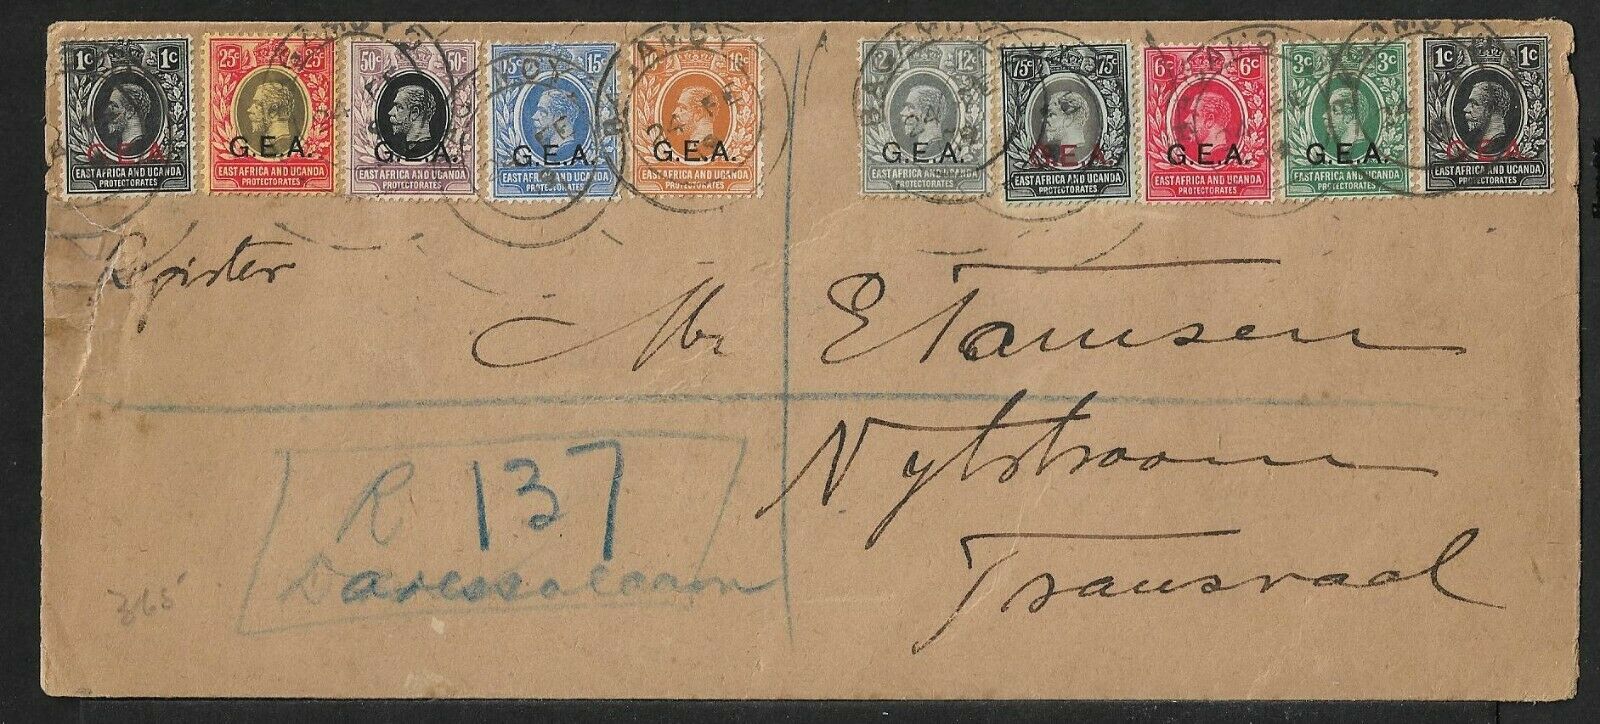 GERMAN EAST AFRICA 10 STAMPS  REG LABEL BY HAND COVER 1919 SCARCE